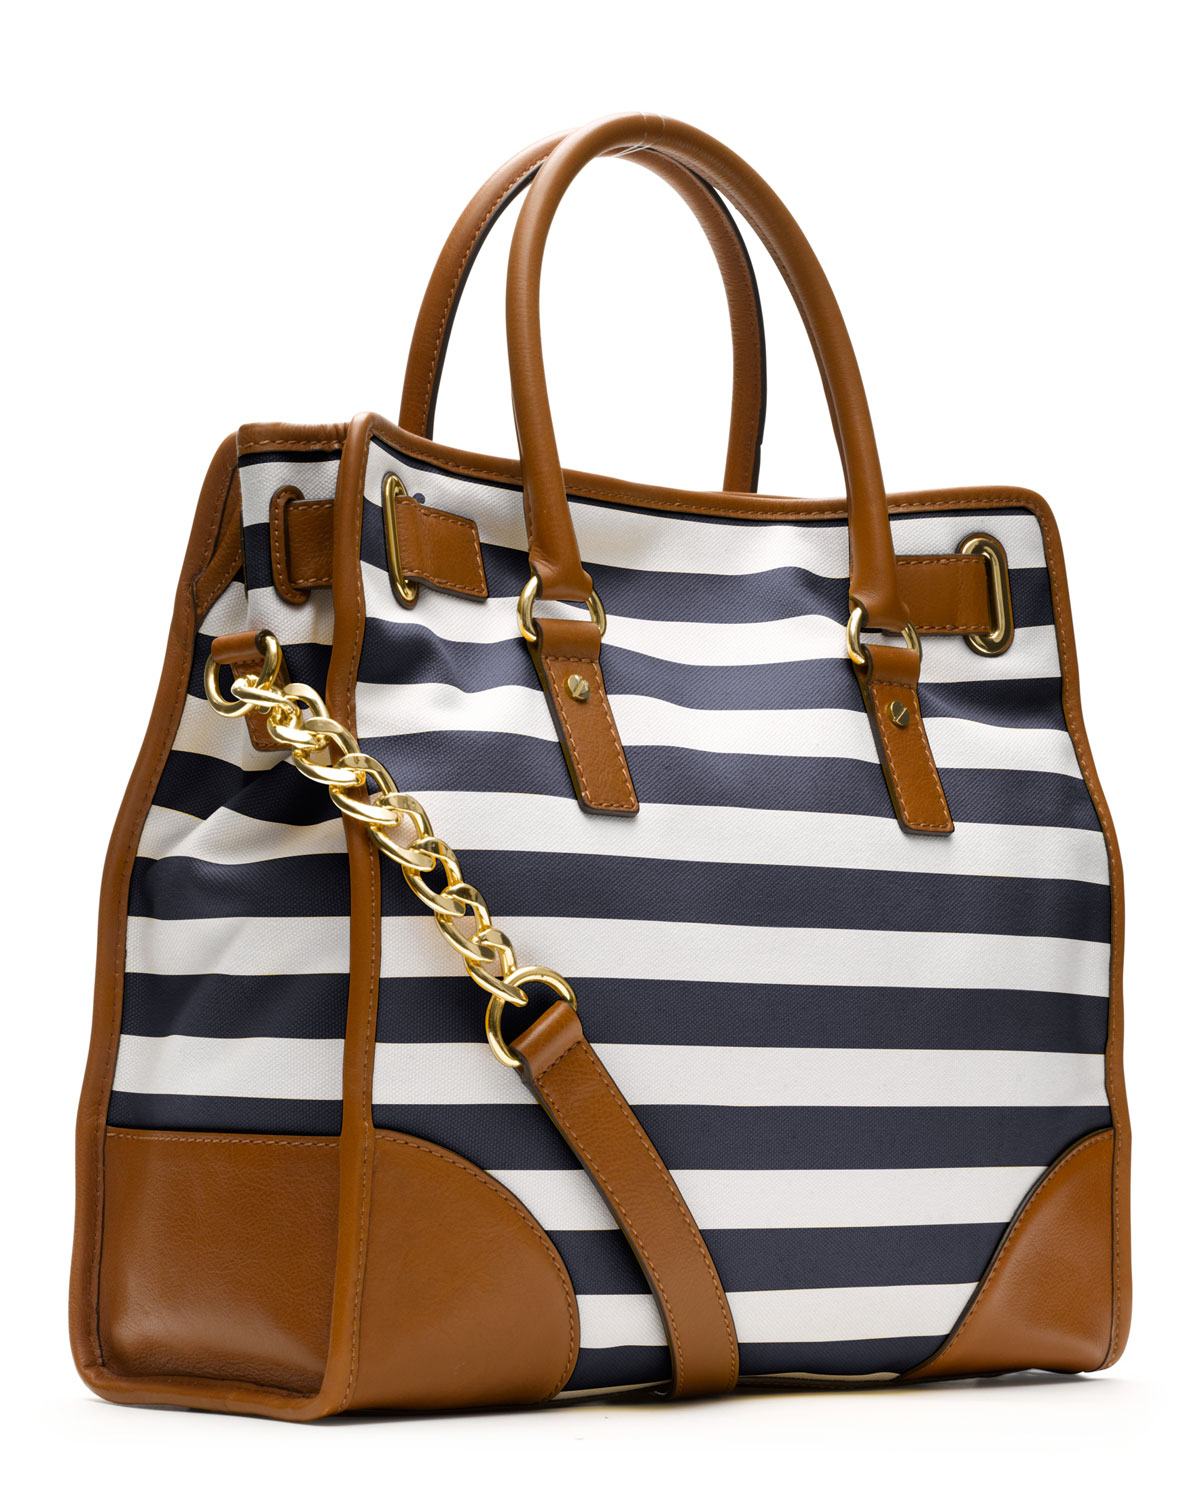 Michael Kors Large Hamilton Striped Canvas Tote in Navy (Blue) - Lyst